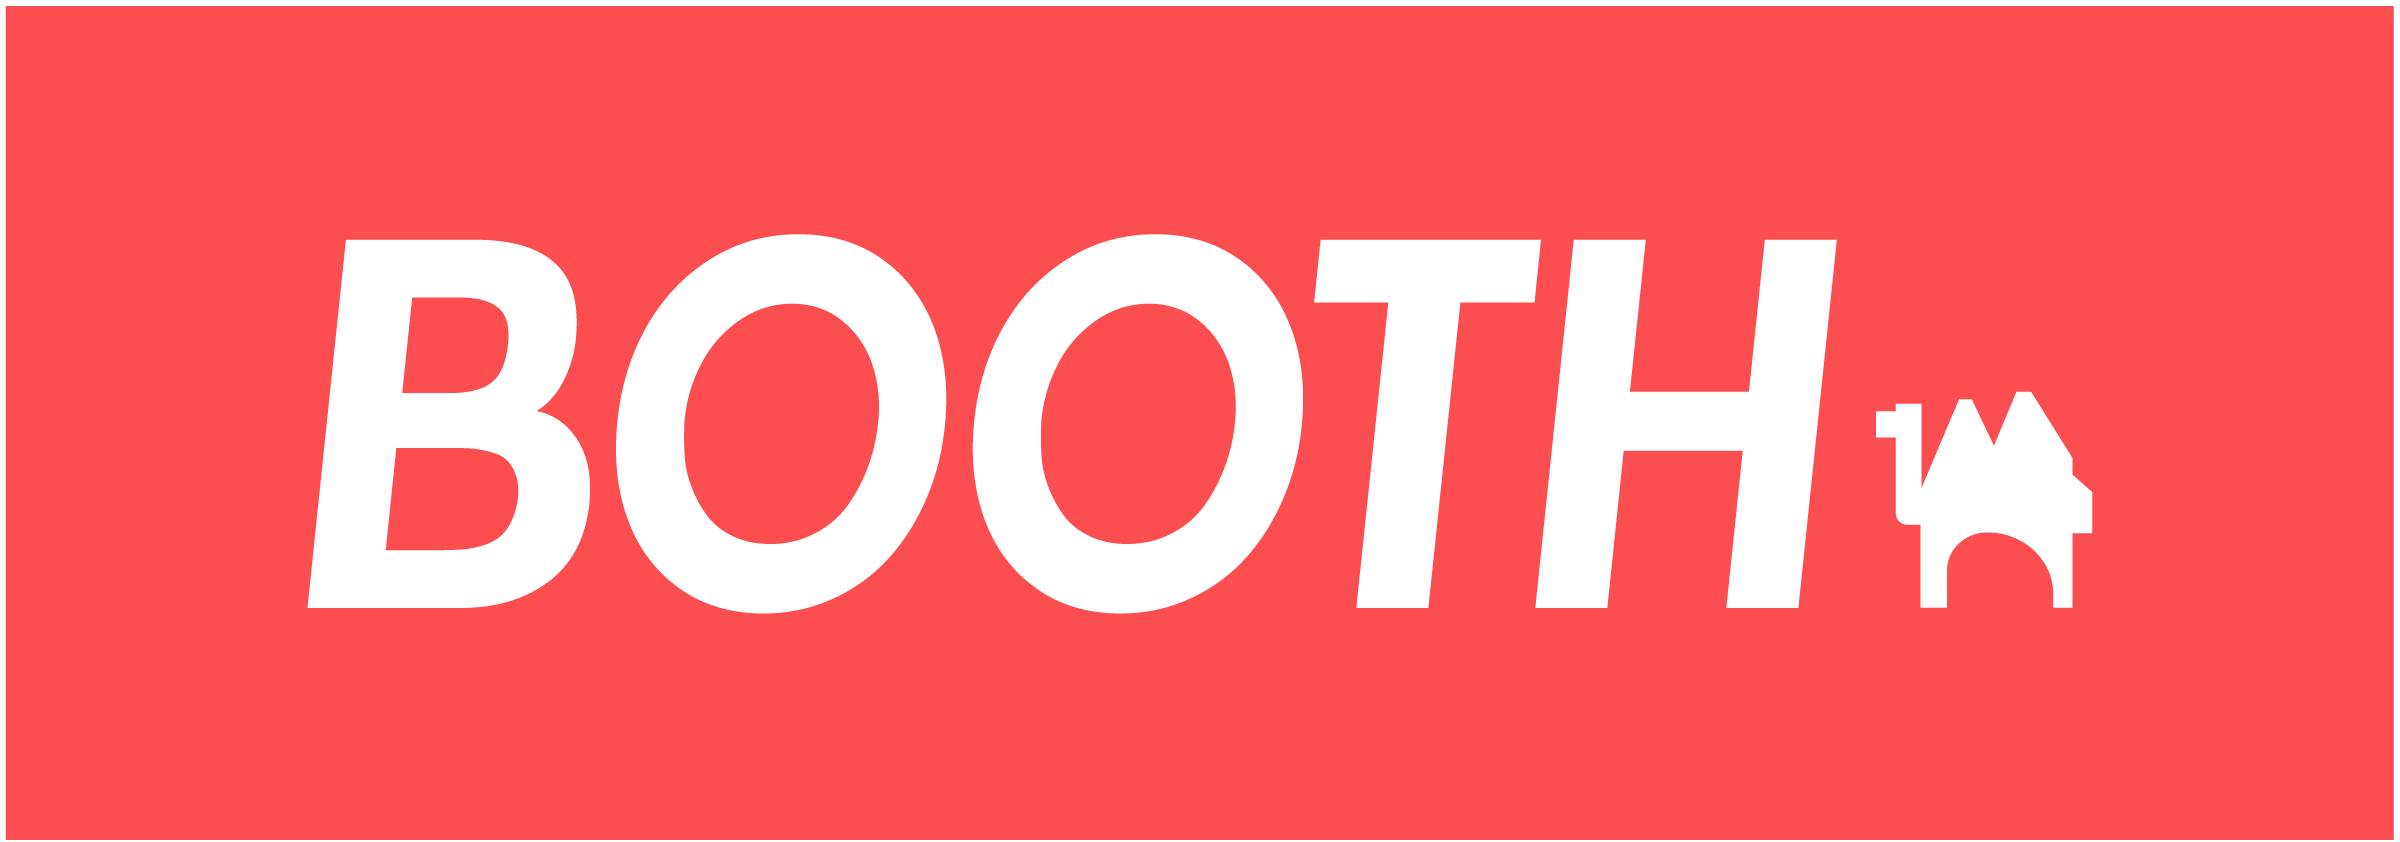 BOOTHロゴ